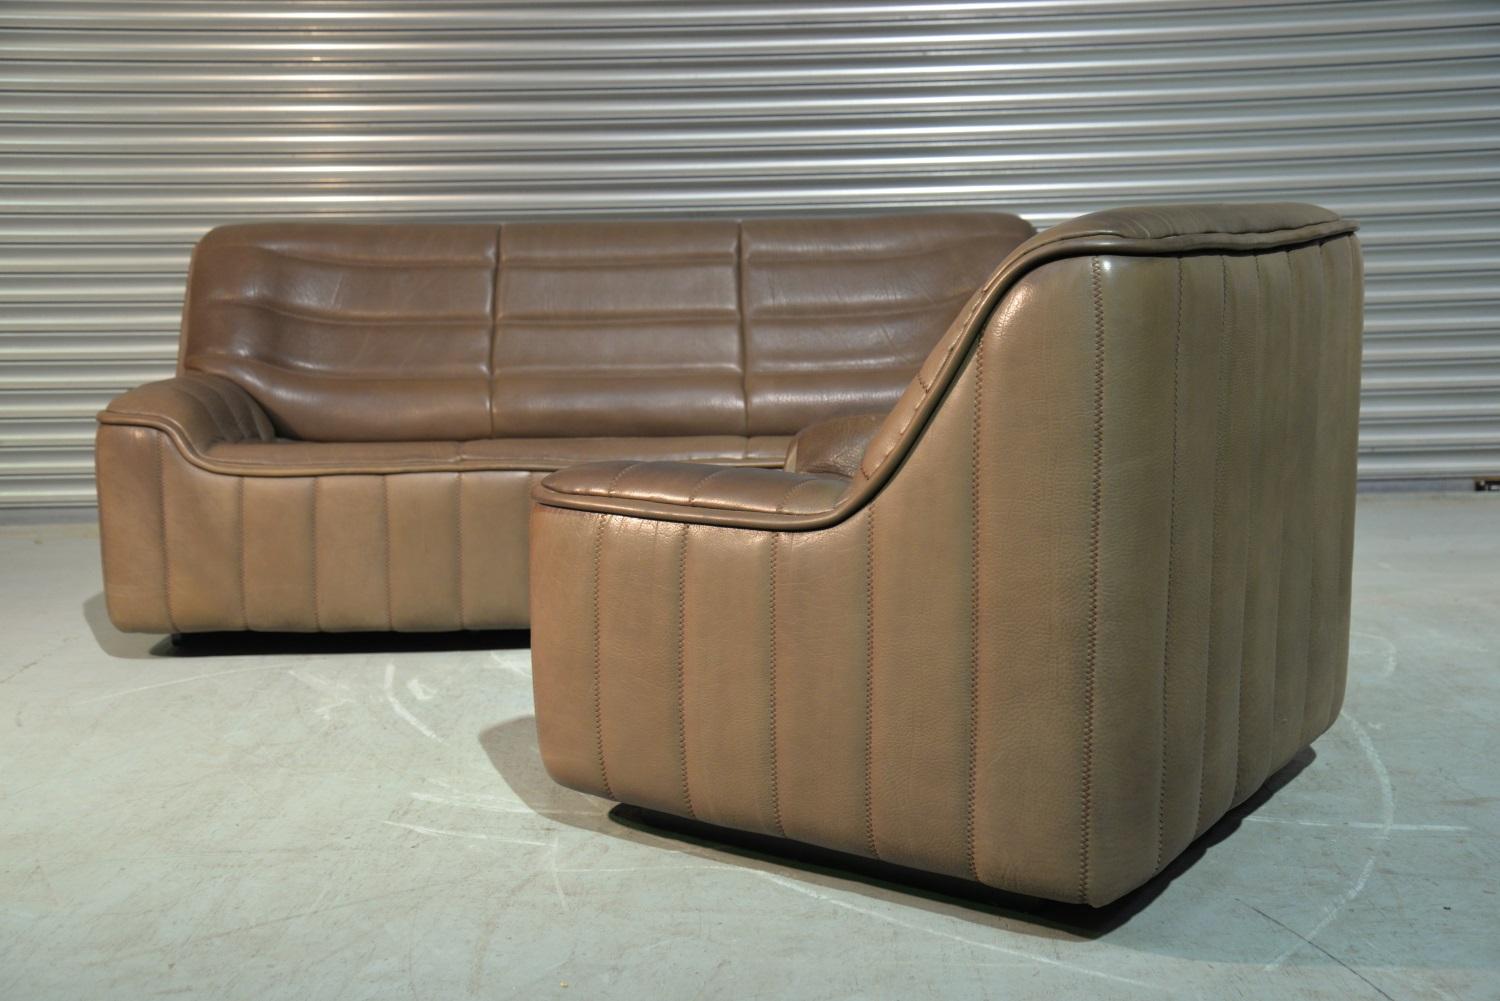 Late 20th Century Vintage Swiss De Sede Ds 84 Leather Sofa and Armchair, Switzerland, 1970s